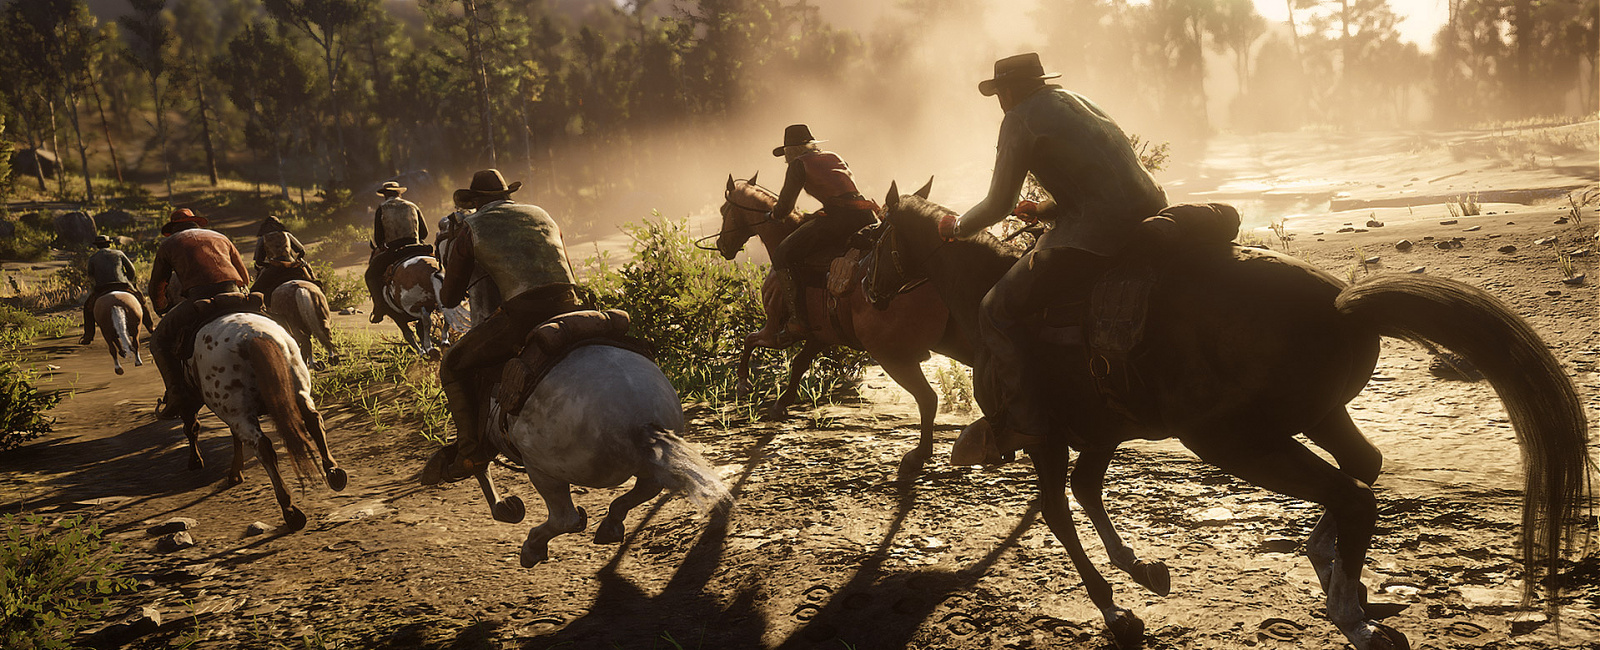 RDR 2 Works Perfectly Fine on Steam Deck with High Settings